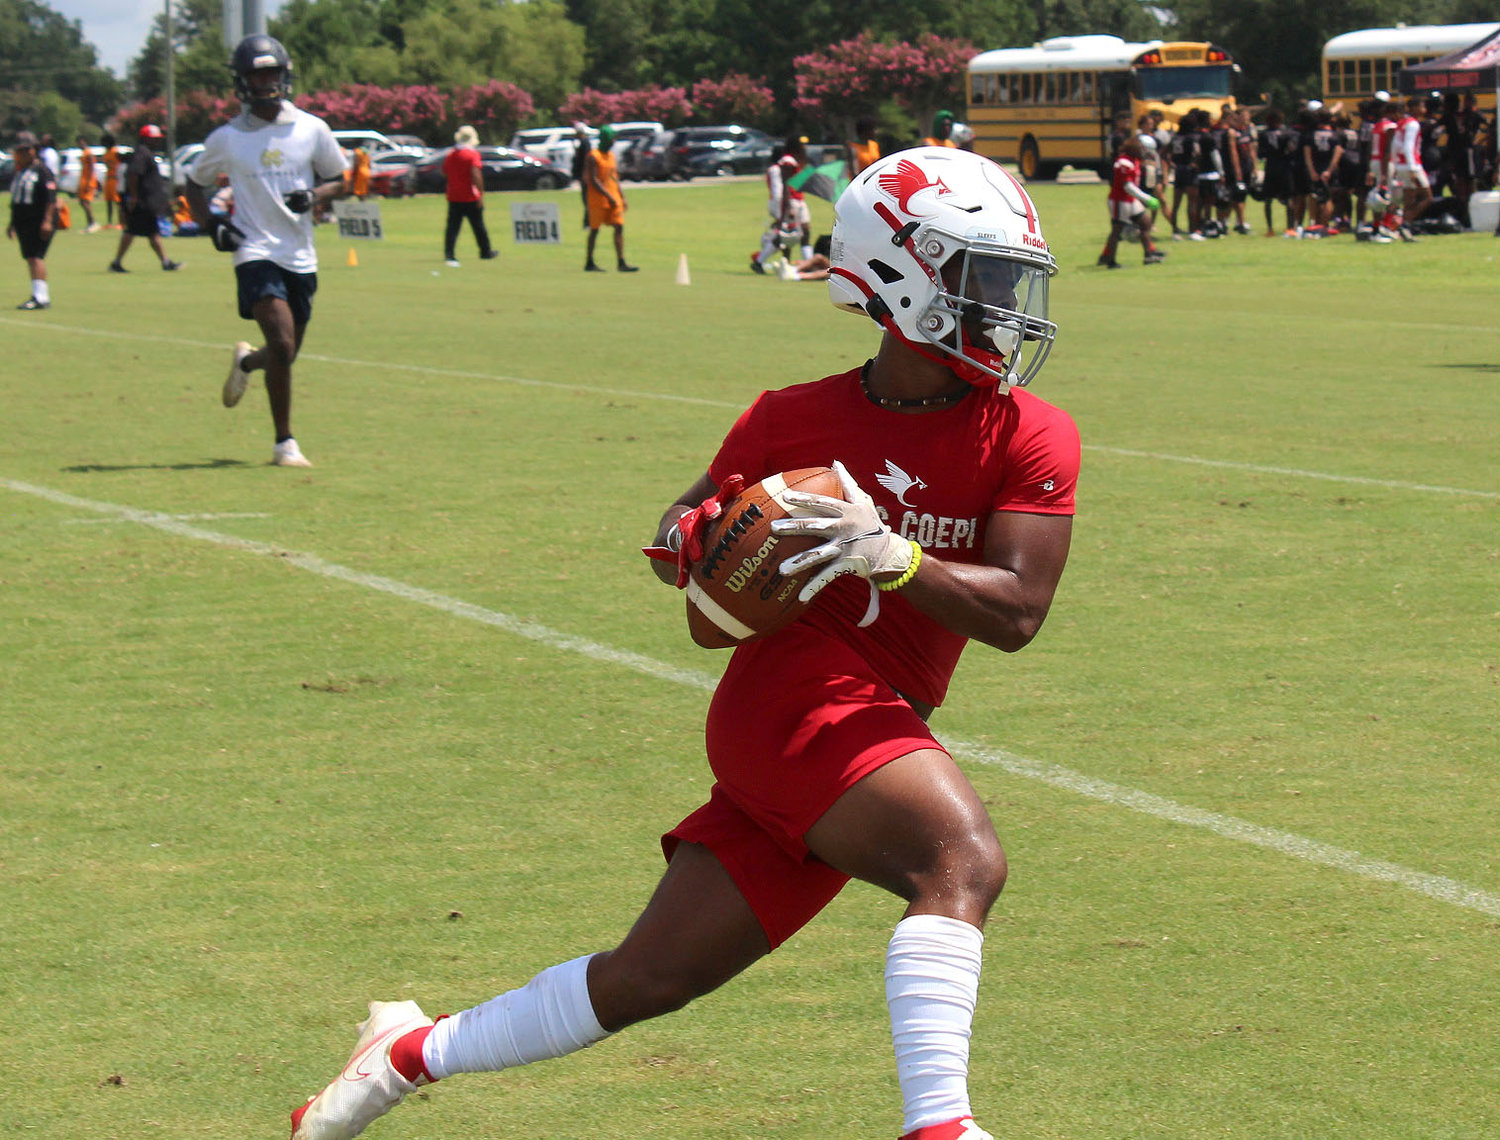 St. Michael senior Braylan Green secures a catch and turns up field for a touchdown during the Cardinals’ pool-play game against the Mobile Christian Leopards at Daphne’s Al Trione Sports Complex during the Jubilee City 7-on-7 Tournament last Thursday.